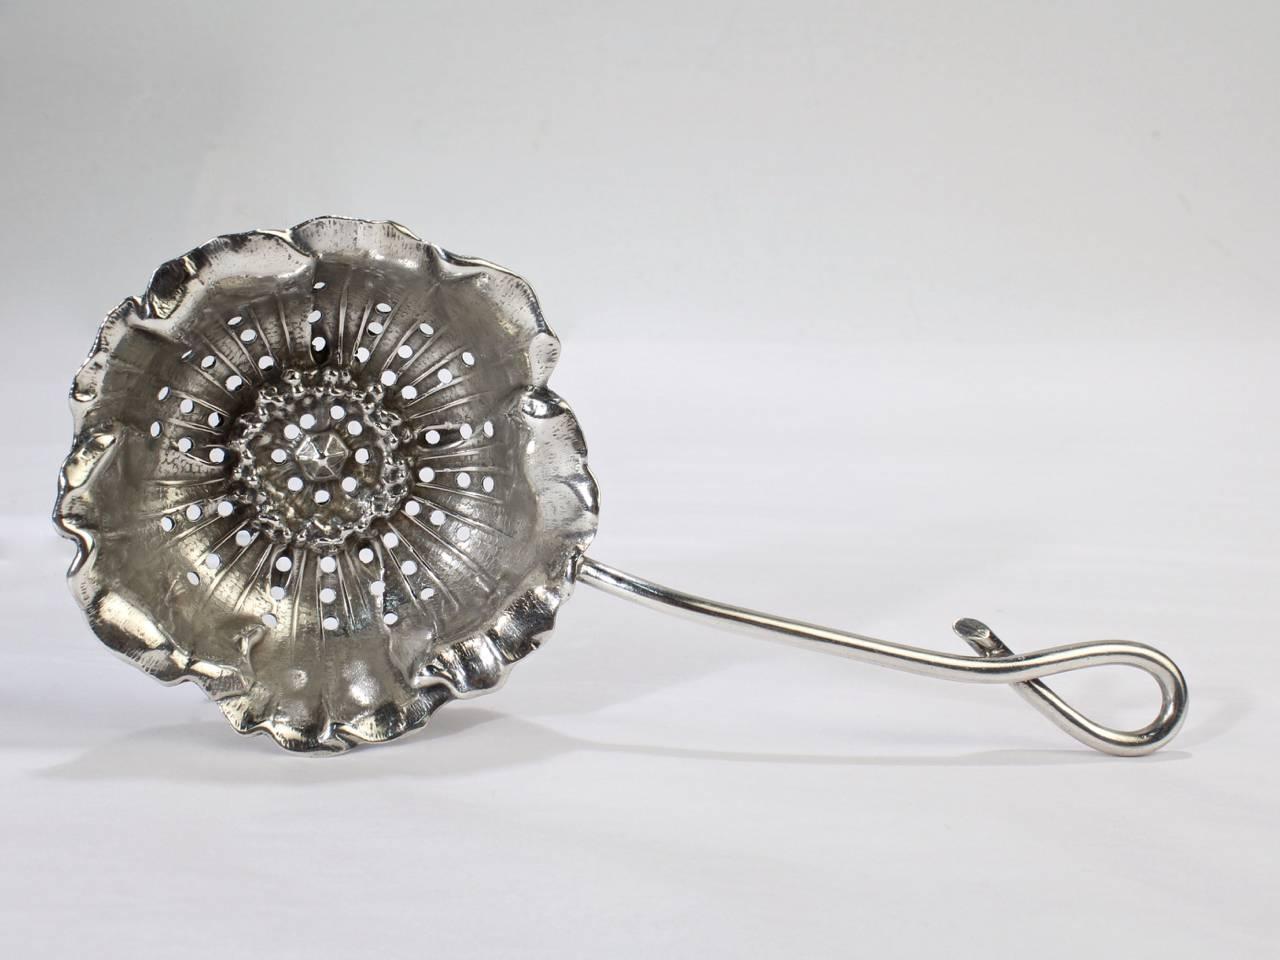 A fine antique American sterling silver figural tea strainer manufactured by George Shiebler & Co.

With the bowl modeled as an inverted poppy flower attached to a handle with looped end.

Reverse bears the Shiebler factory mark, Sterling, and